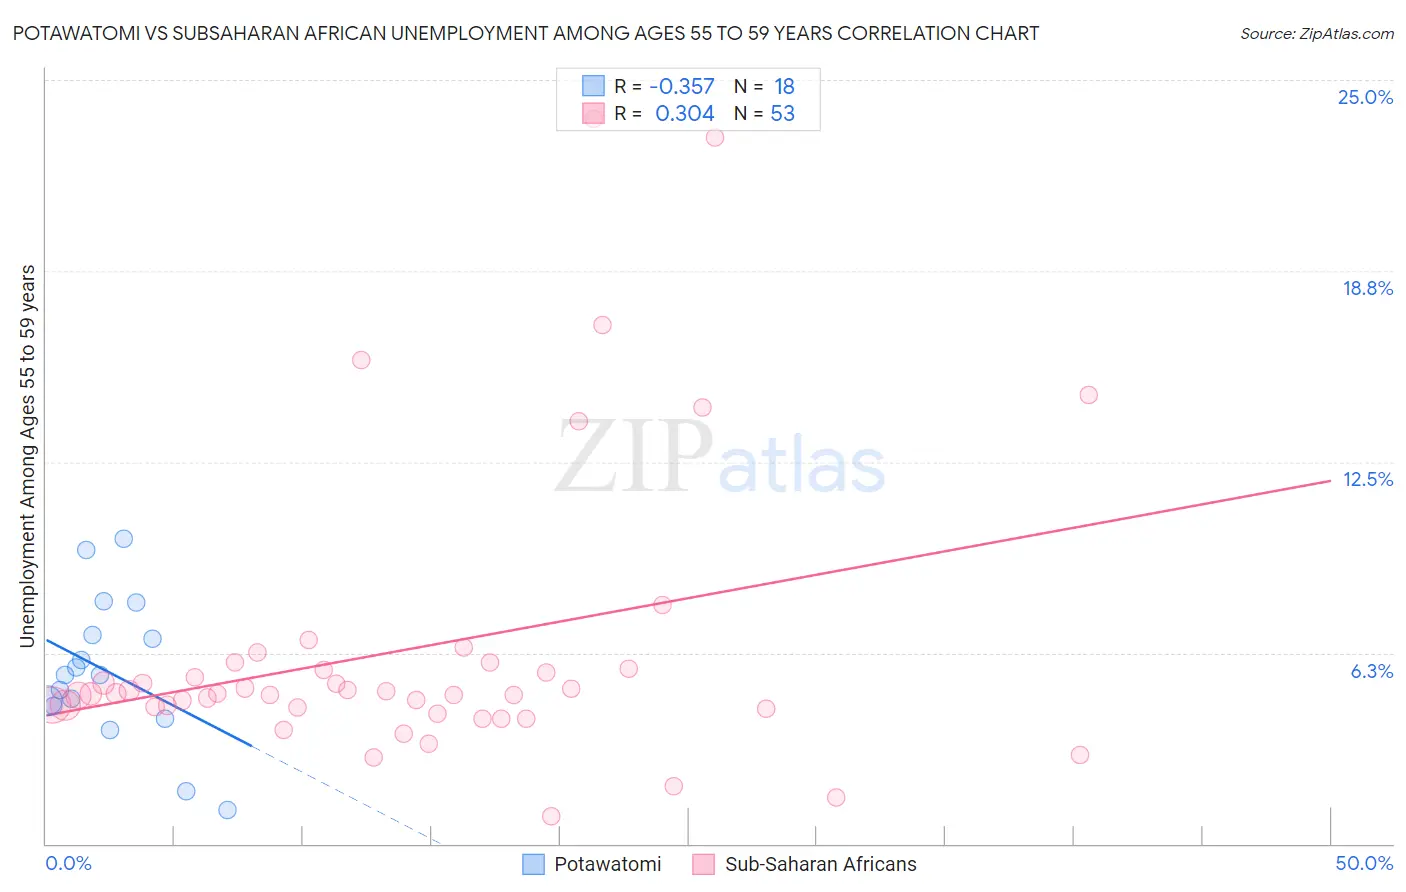 Potawatomi vs Subsaharan African Unemployment Among Ages 55 to 59 years